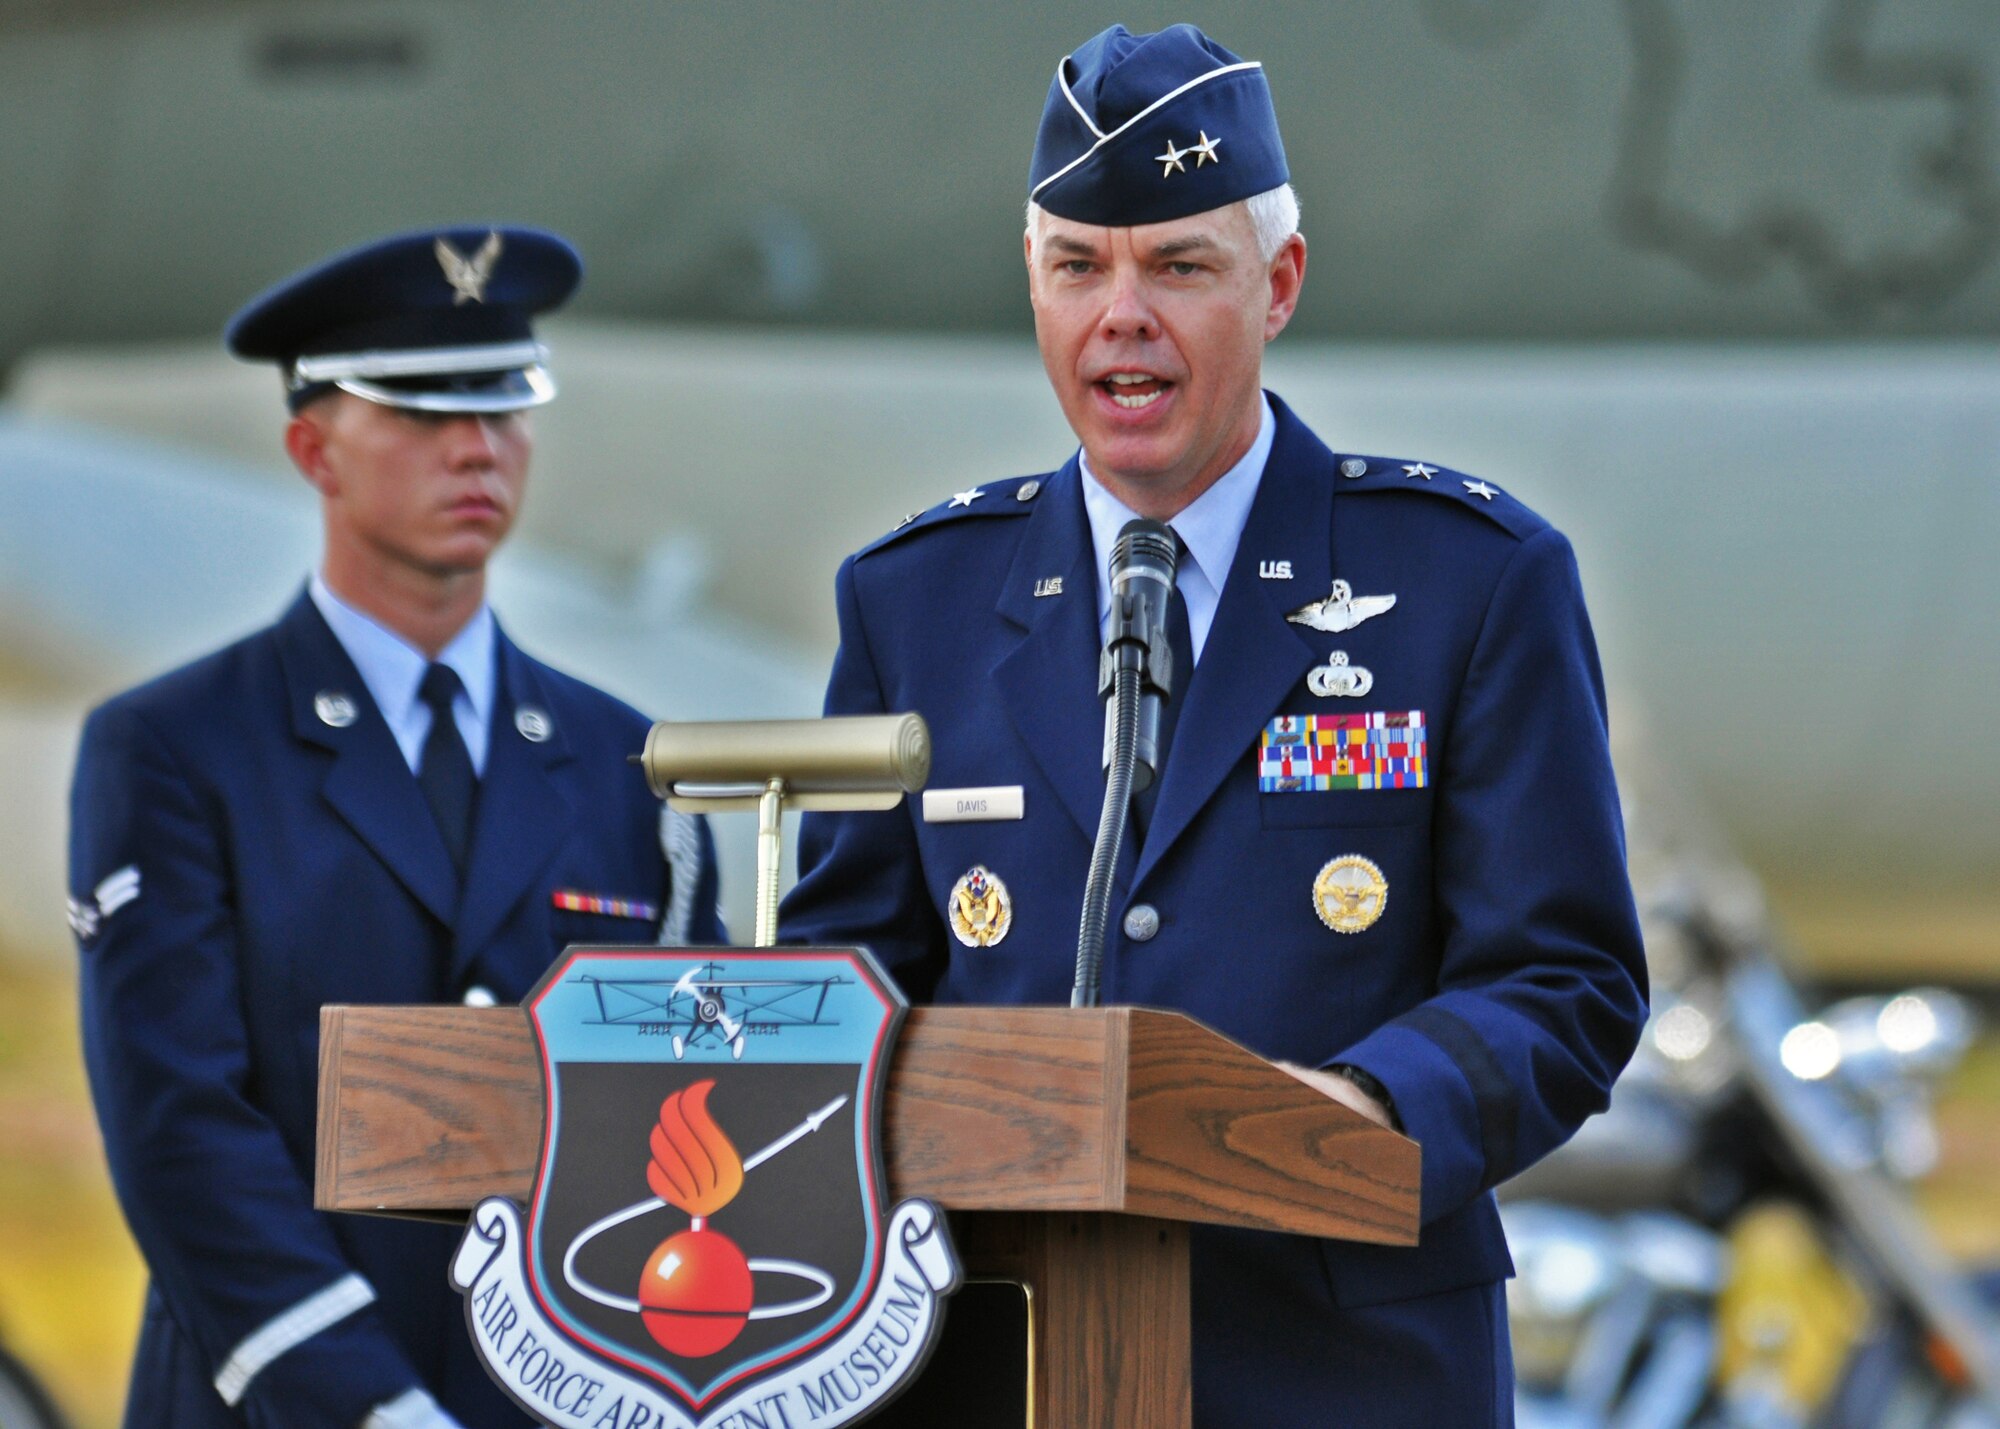 AAC commander nominated for promotion > Eglin Air Force Base > News